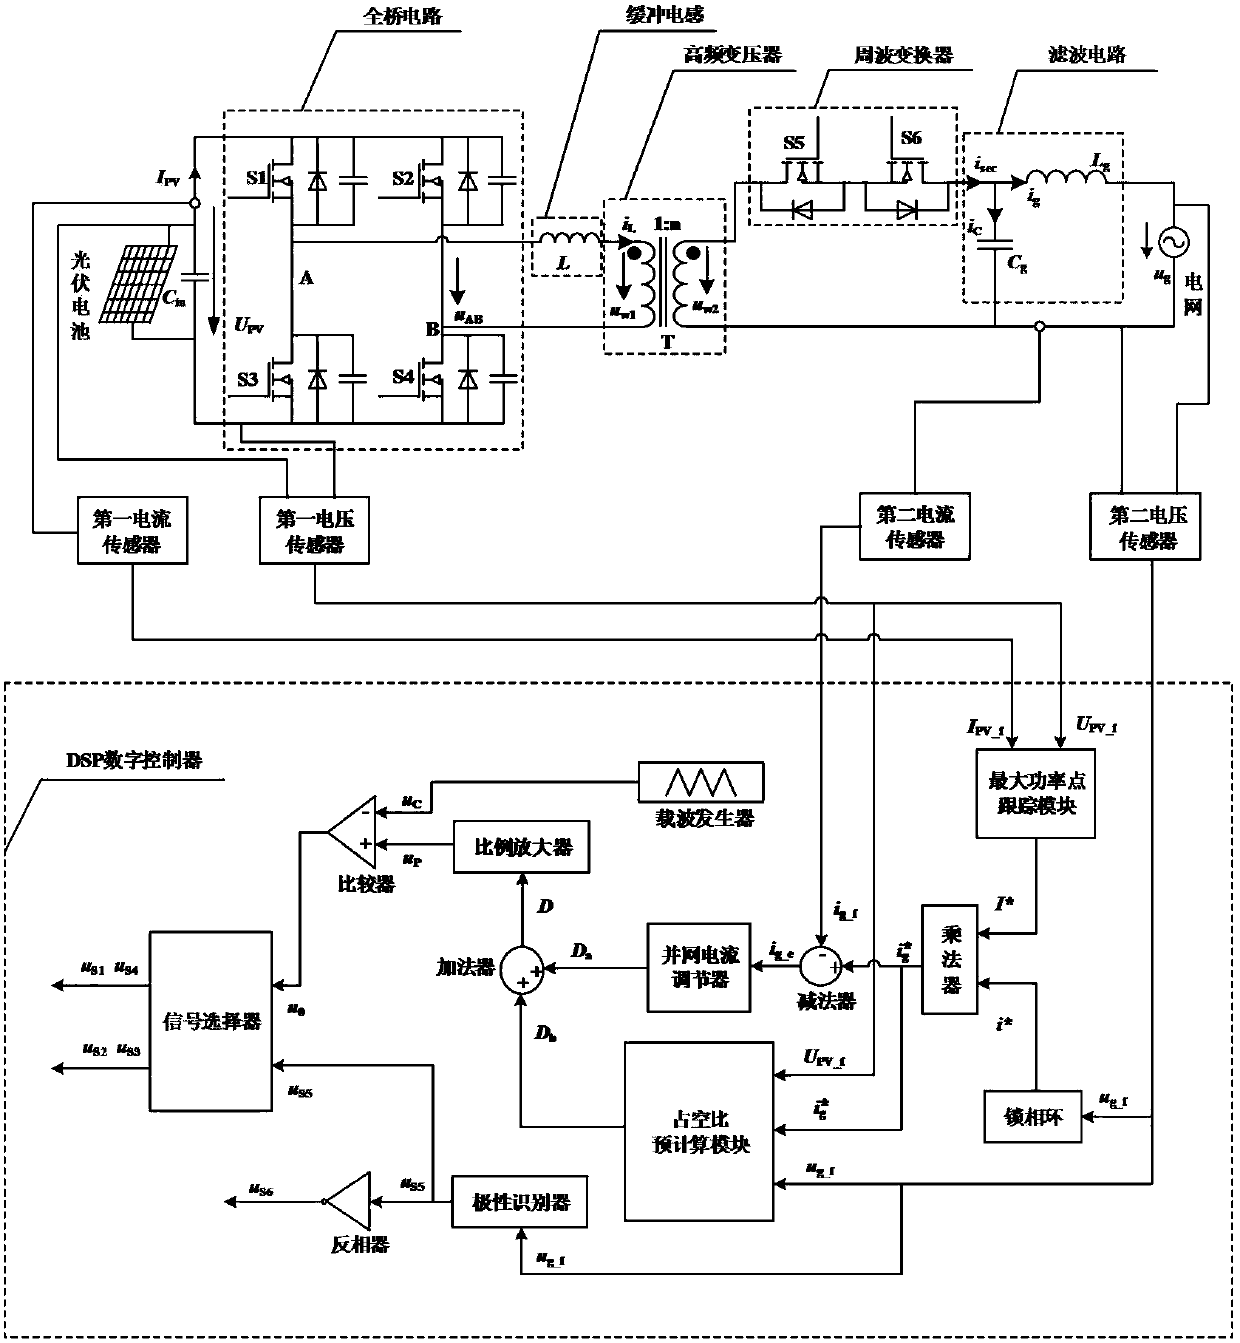 Intermediate current mode dual-tube forward micro-inverter and its digital control device